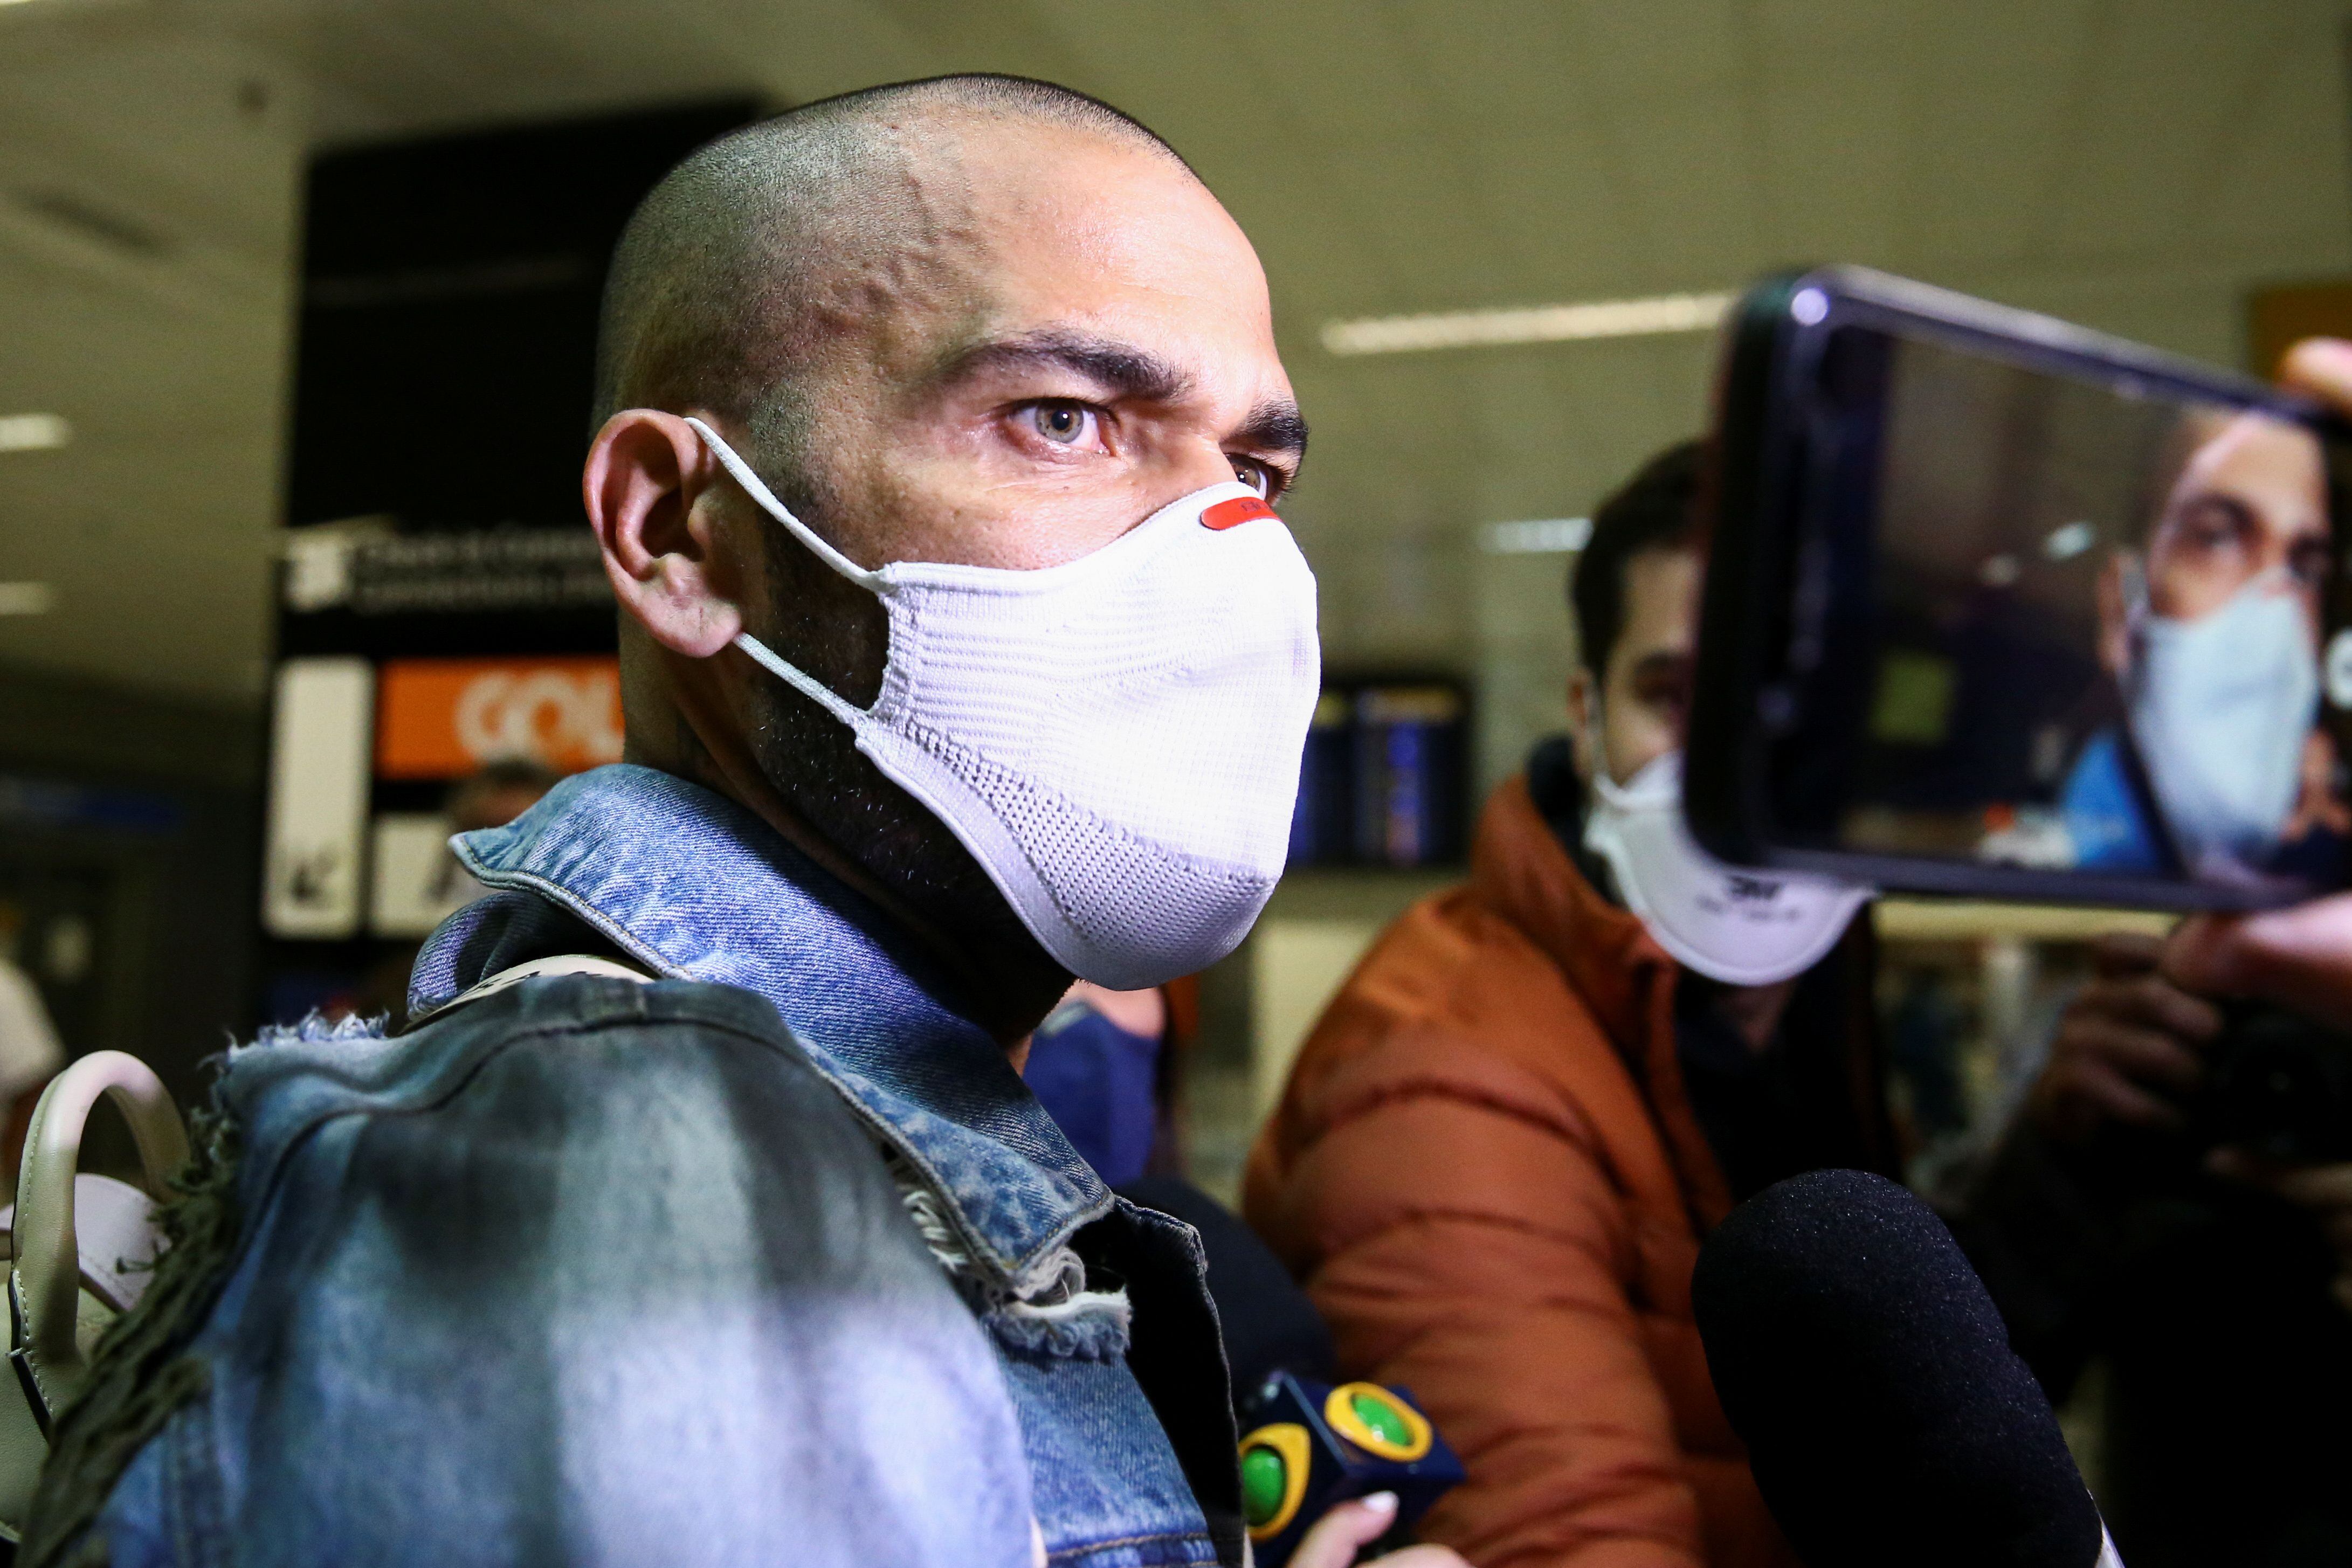 Brazilian soccer player Dani Alves, gold medalist at the Tokyo 2020 Olympics, arrives at the Guarulhos International Airport, near Sao Paulo, Brazil, August 9, 2021. REUTERS/Carla Carniel